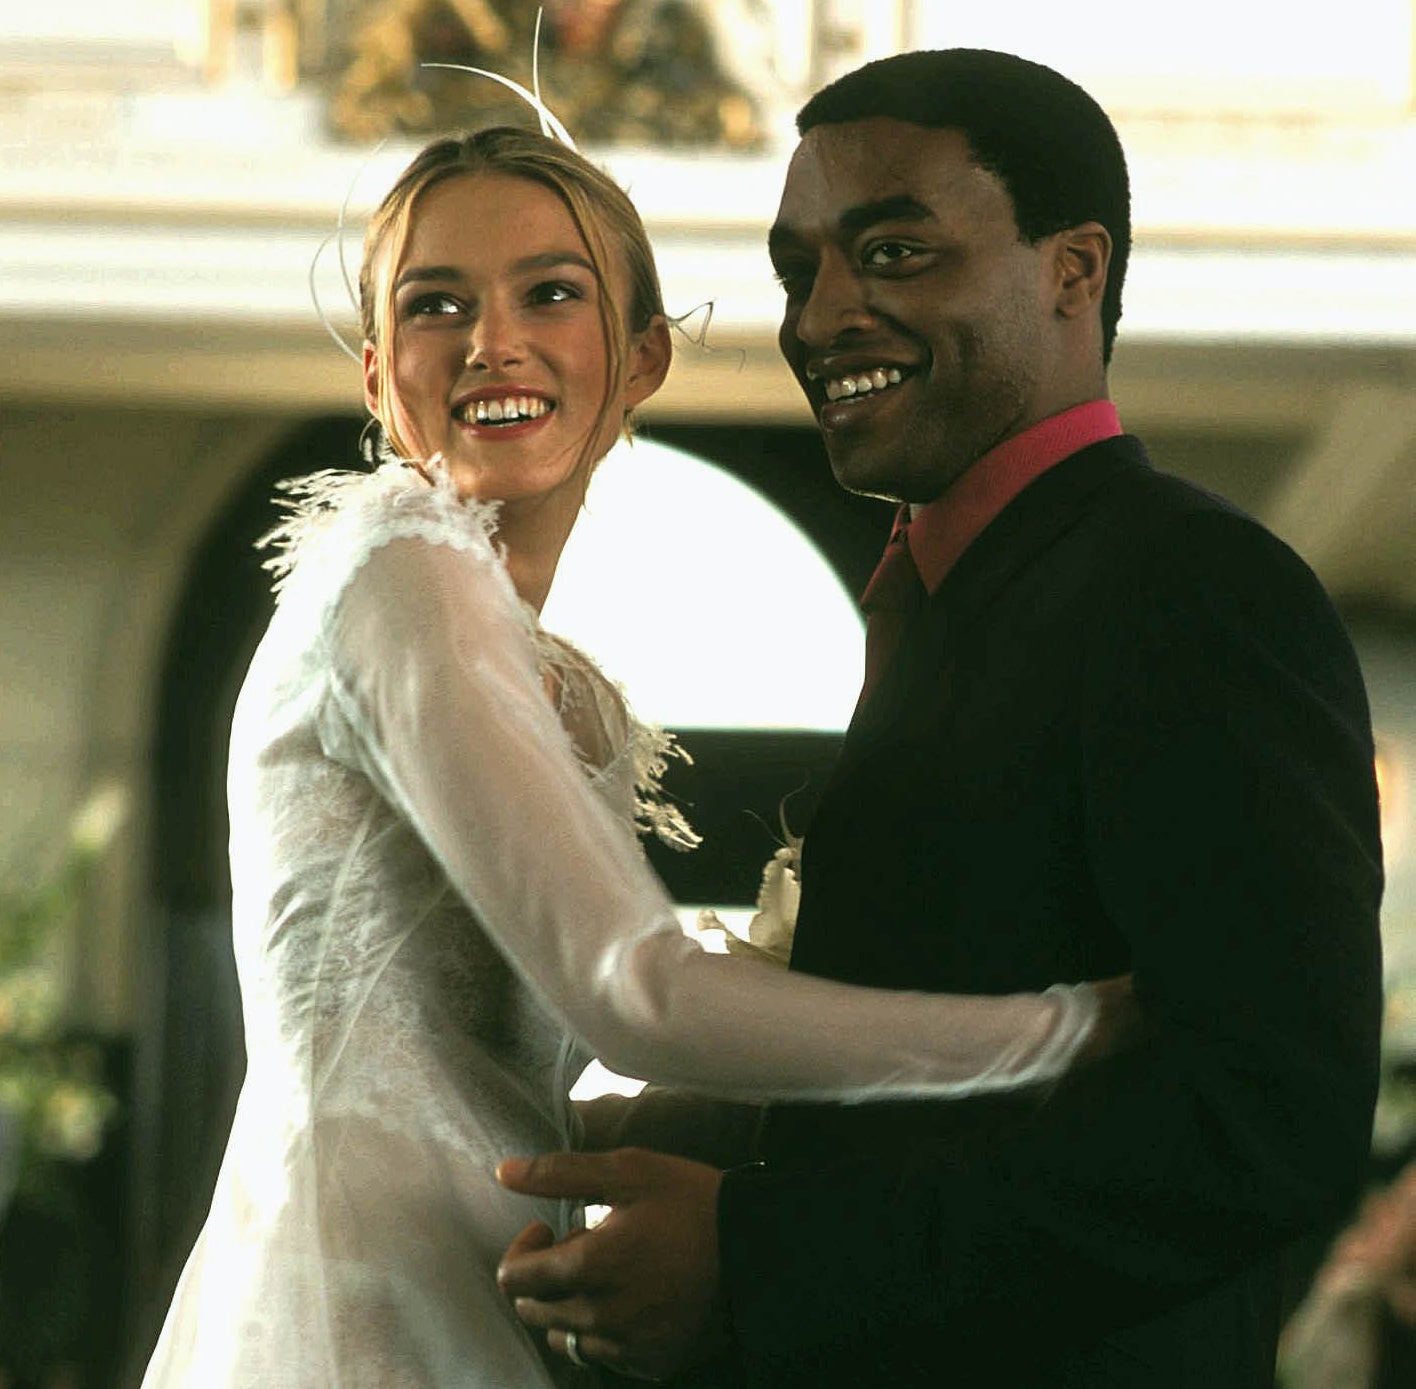 Still from Love Actually: Keira Knightley and Chiwetel Ejiofor wear wedding clothes and stand close together, smiling